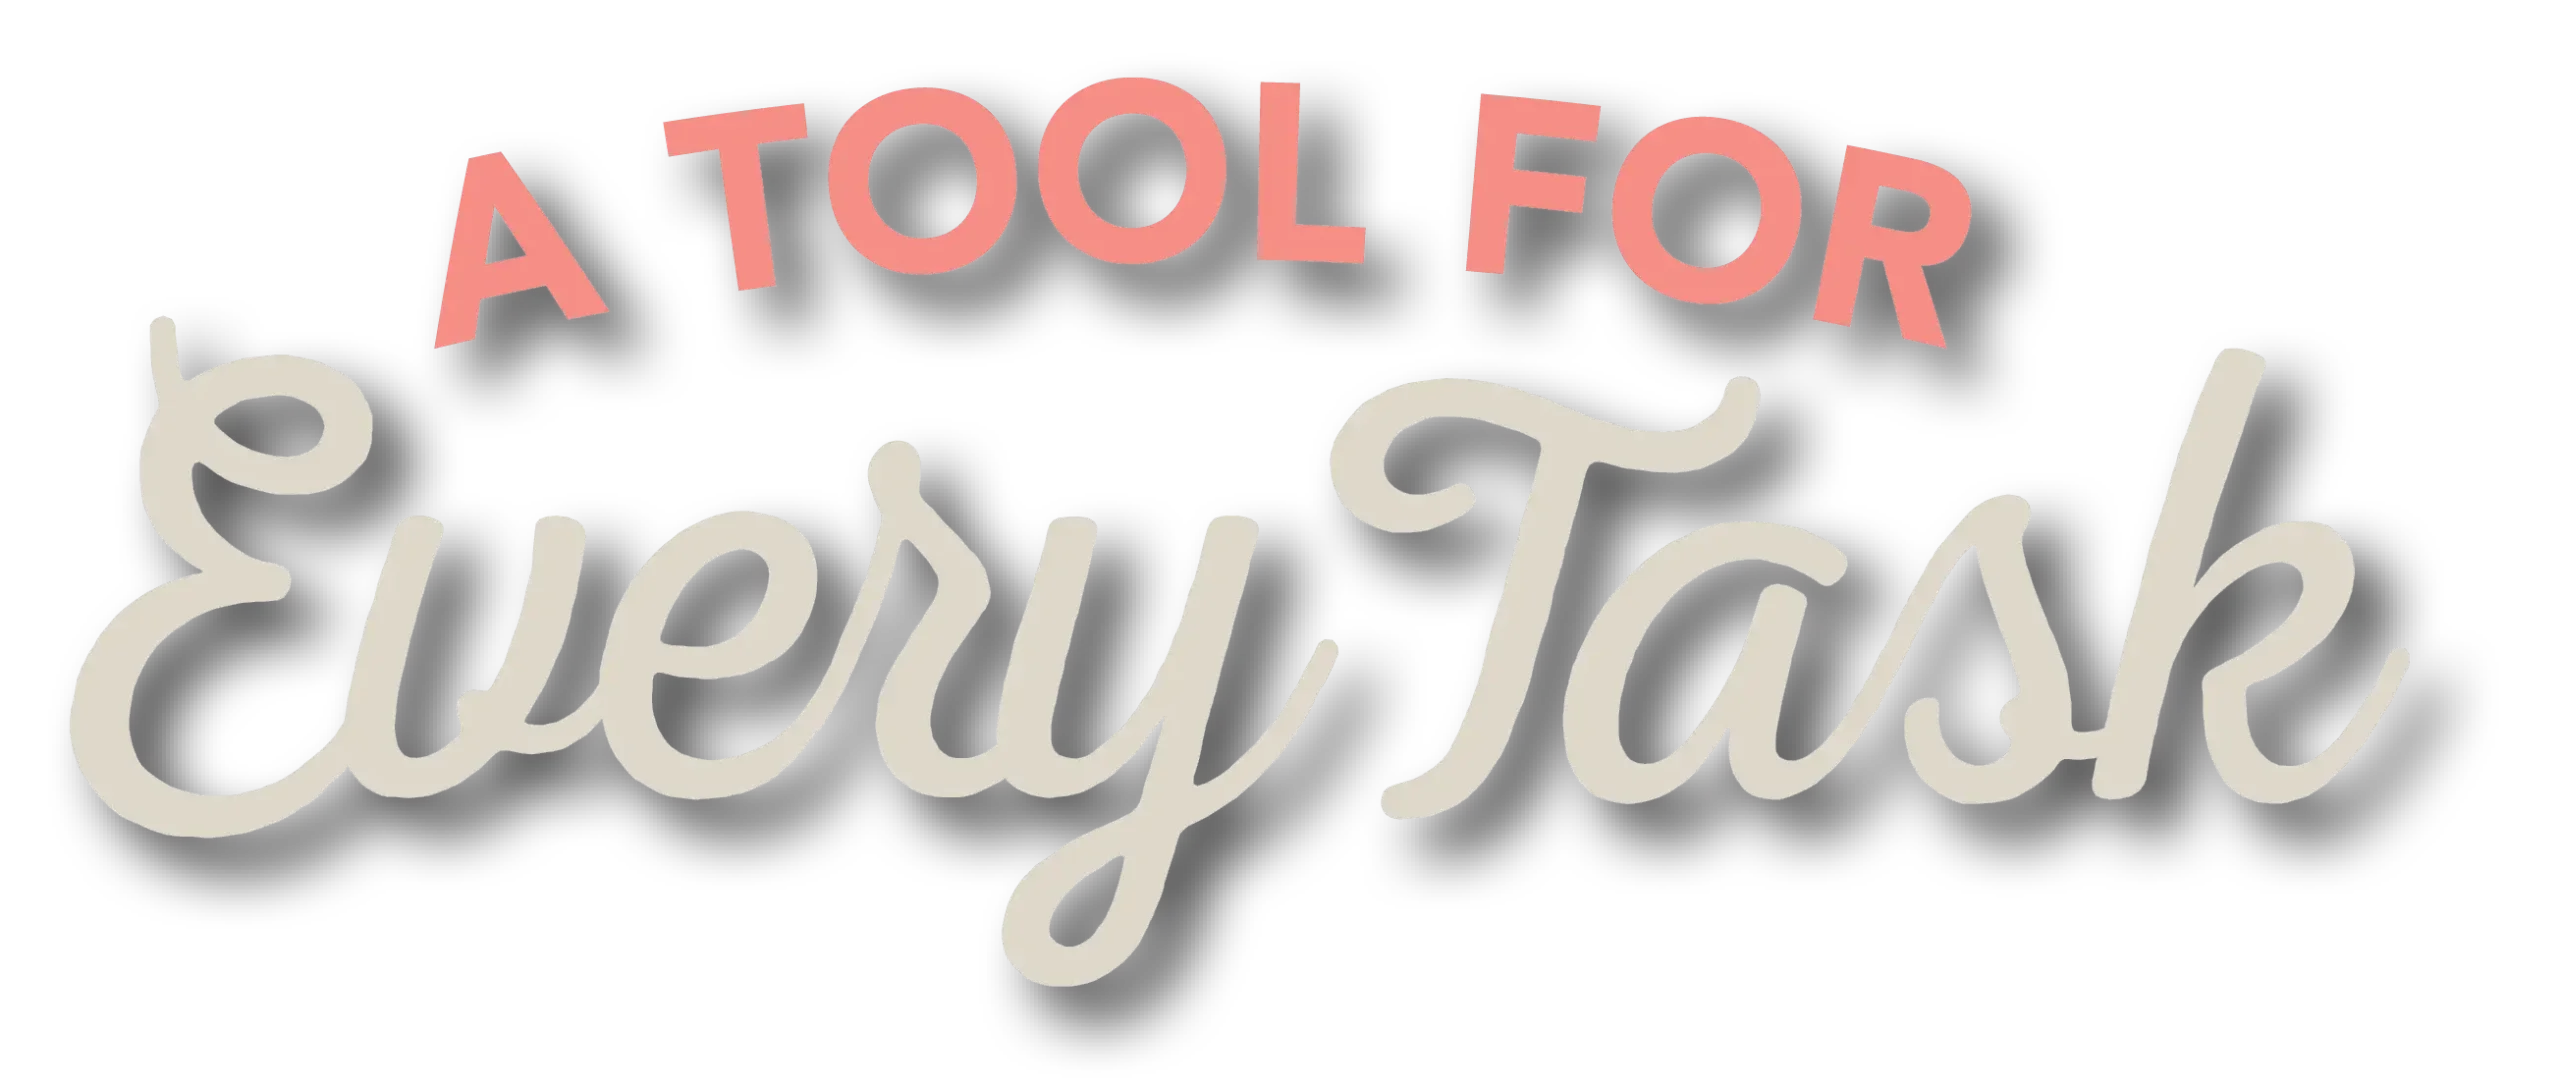 A Tool for Every Task